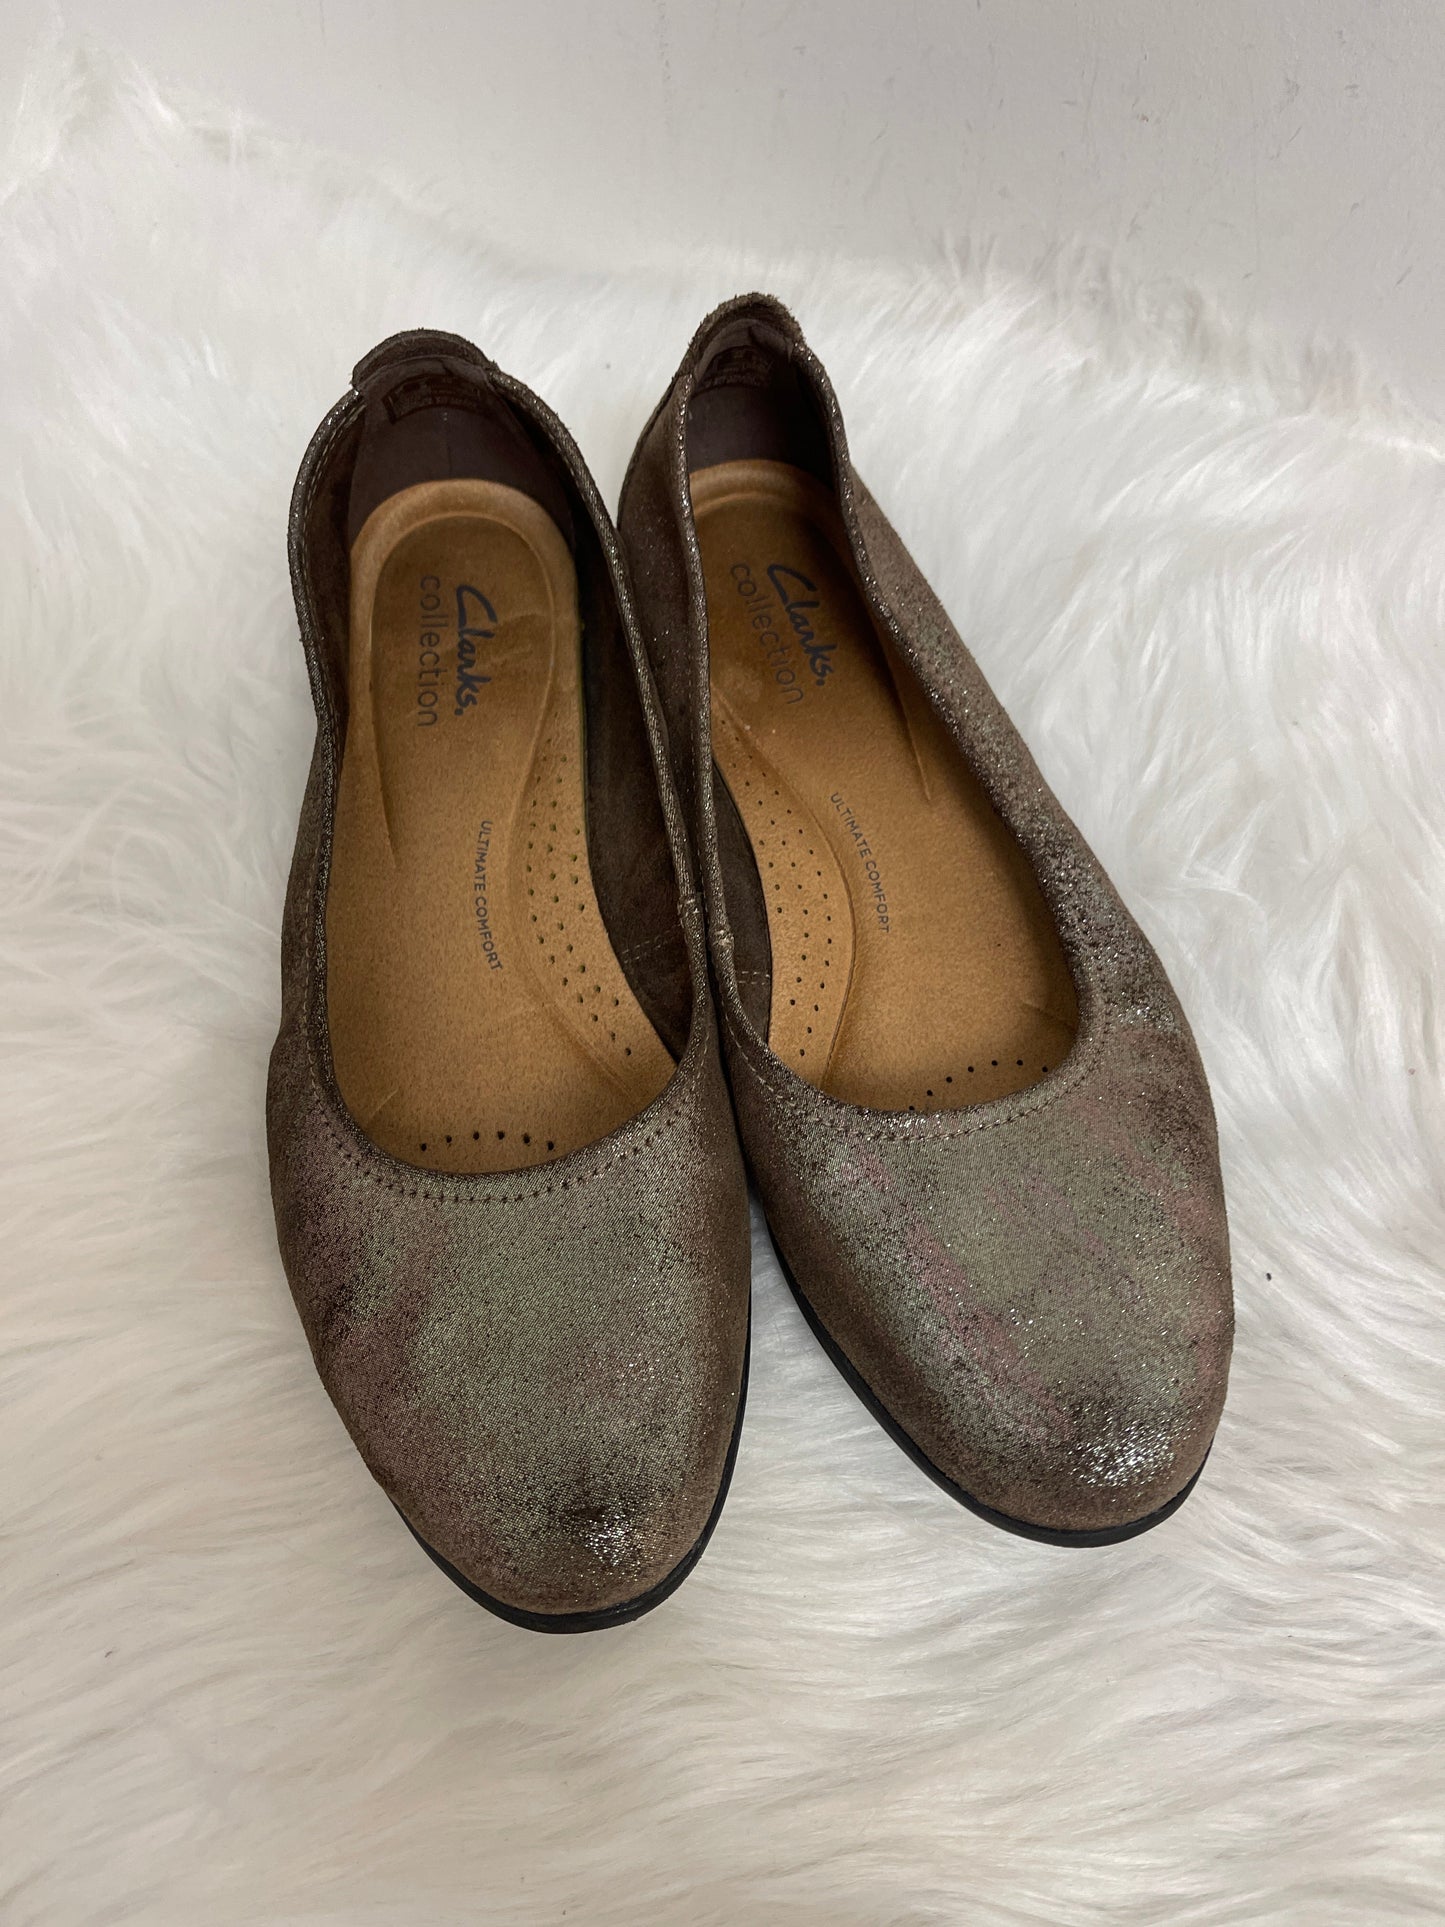 Green Shoes Flats Clarks, Size 8